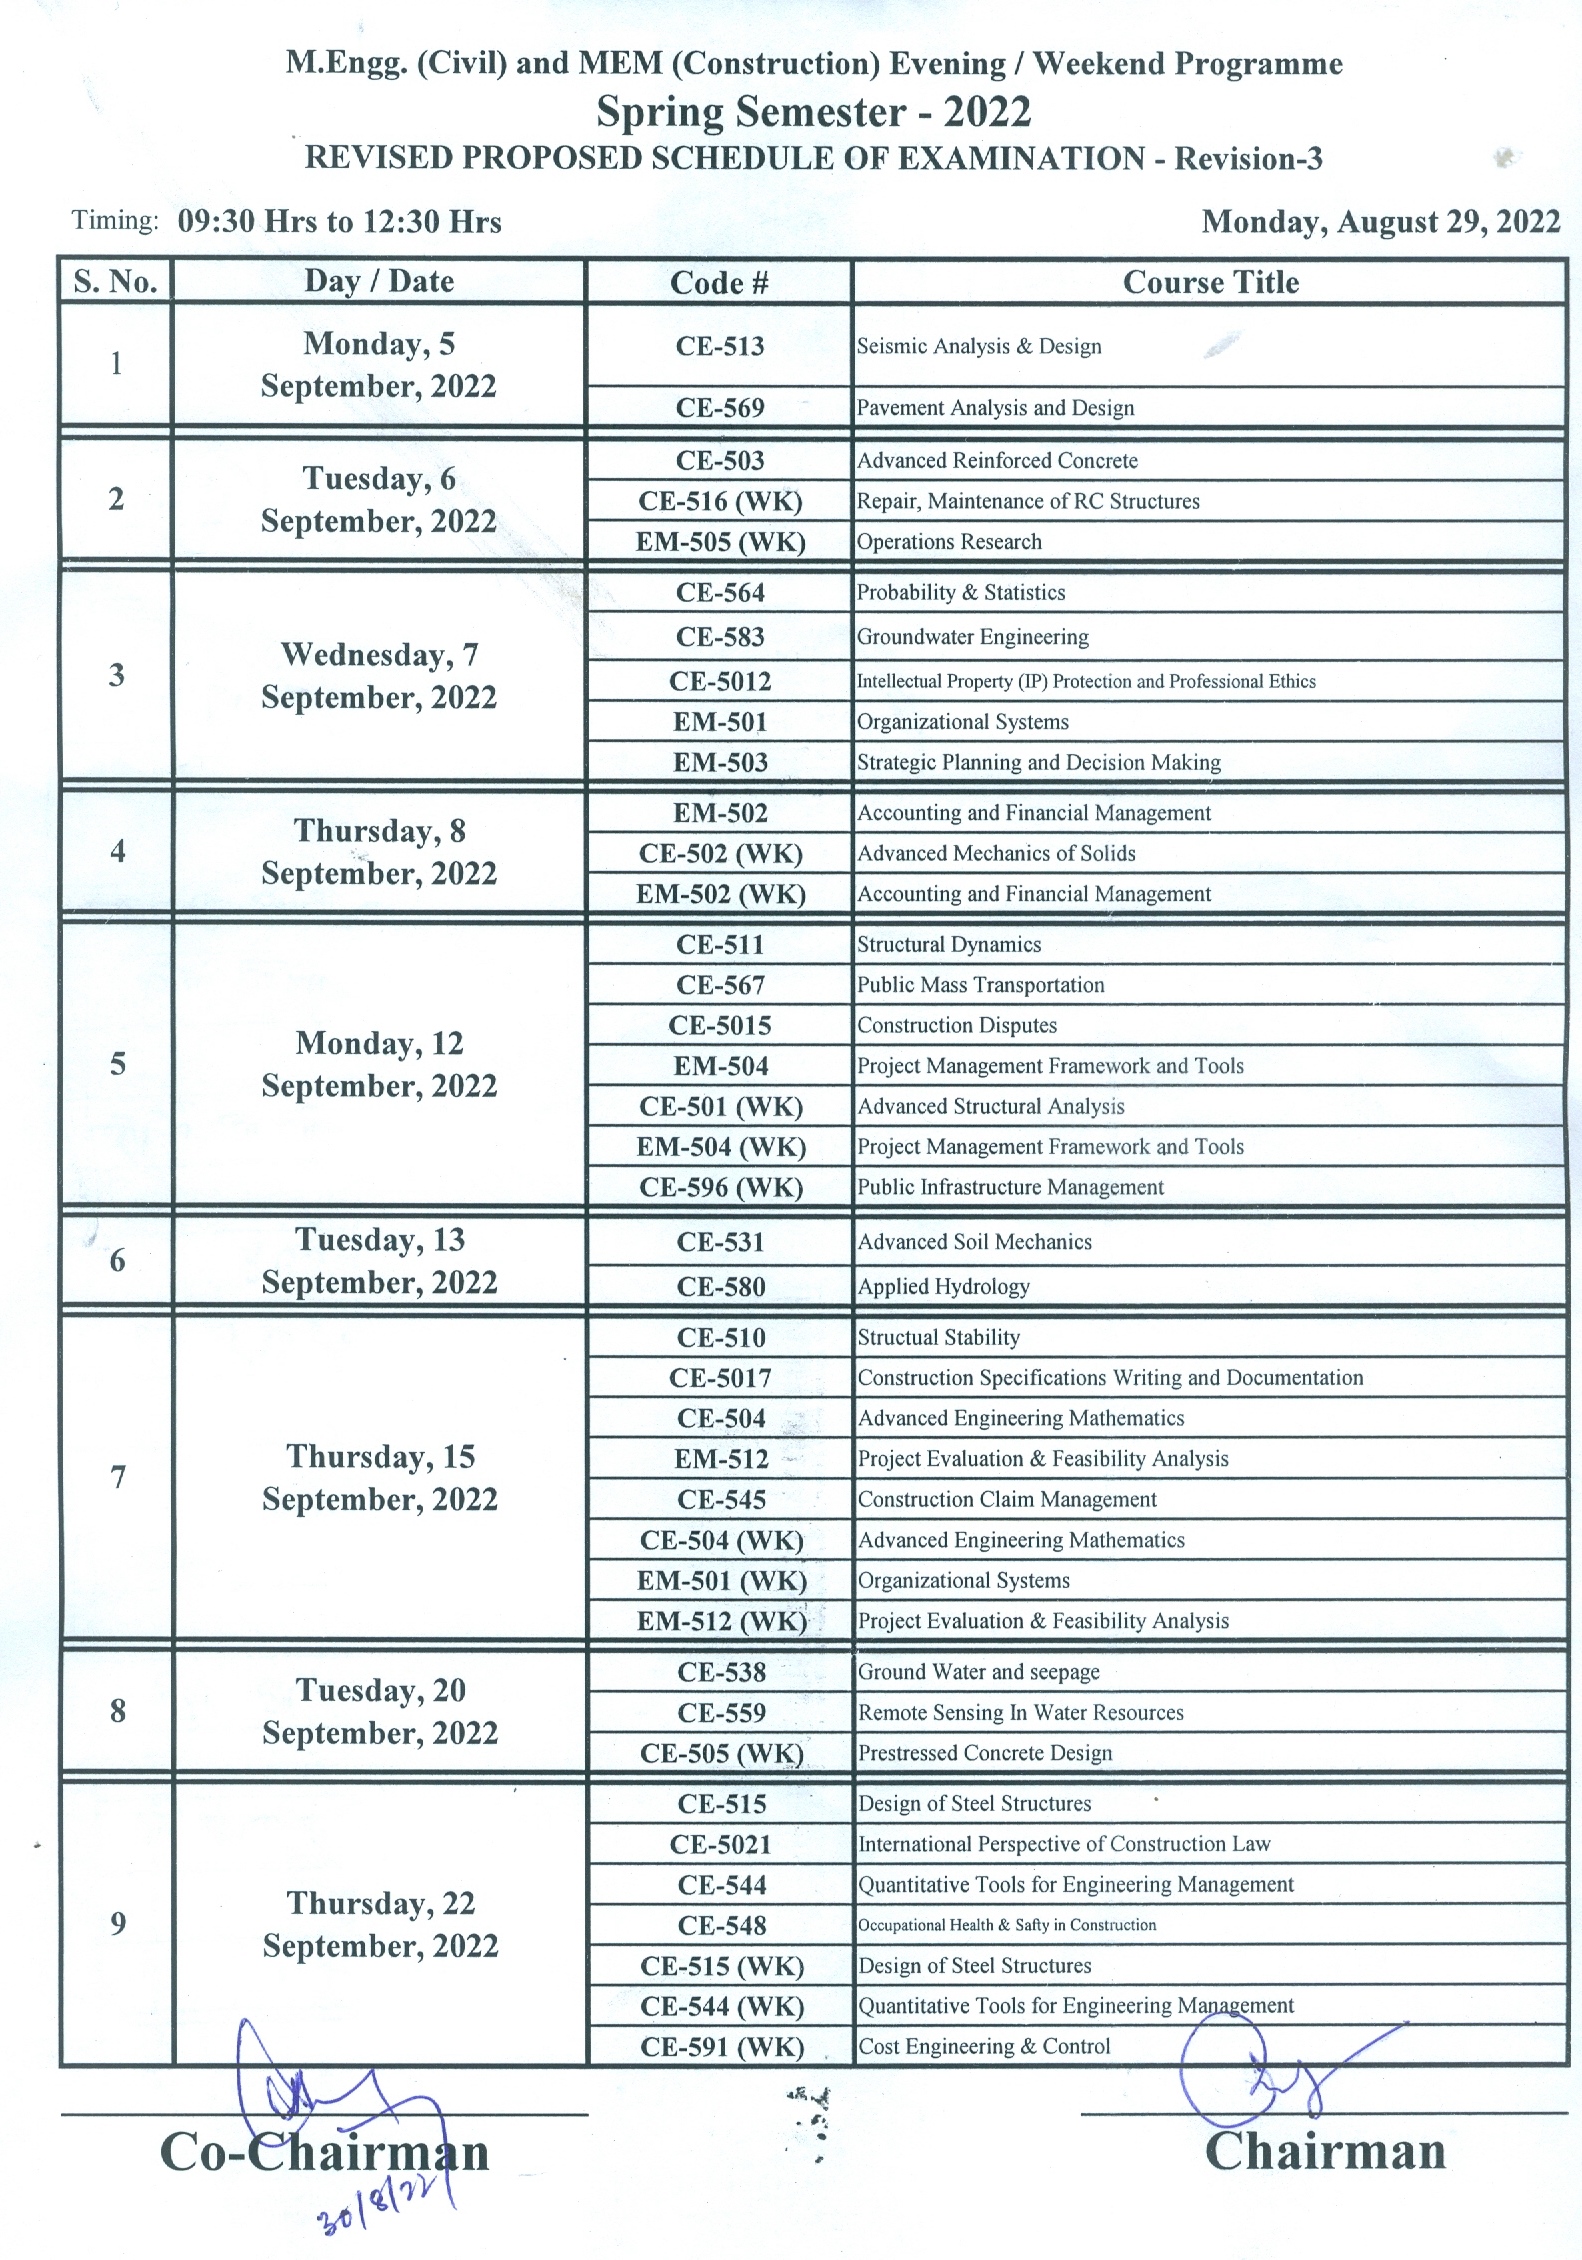 Revised Proposed Masters Exam Timetable For Spring 2022 | Department of Civil Engineering - NED